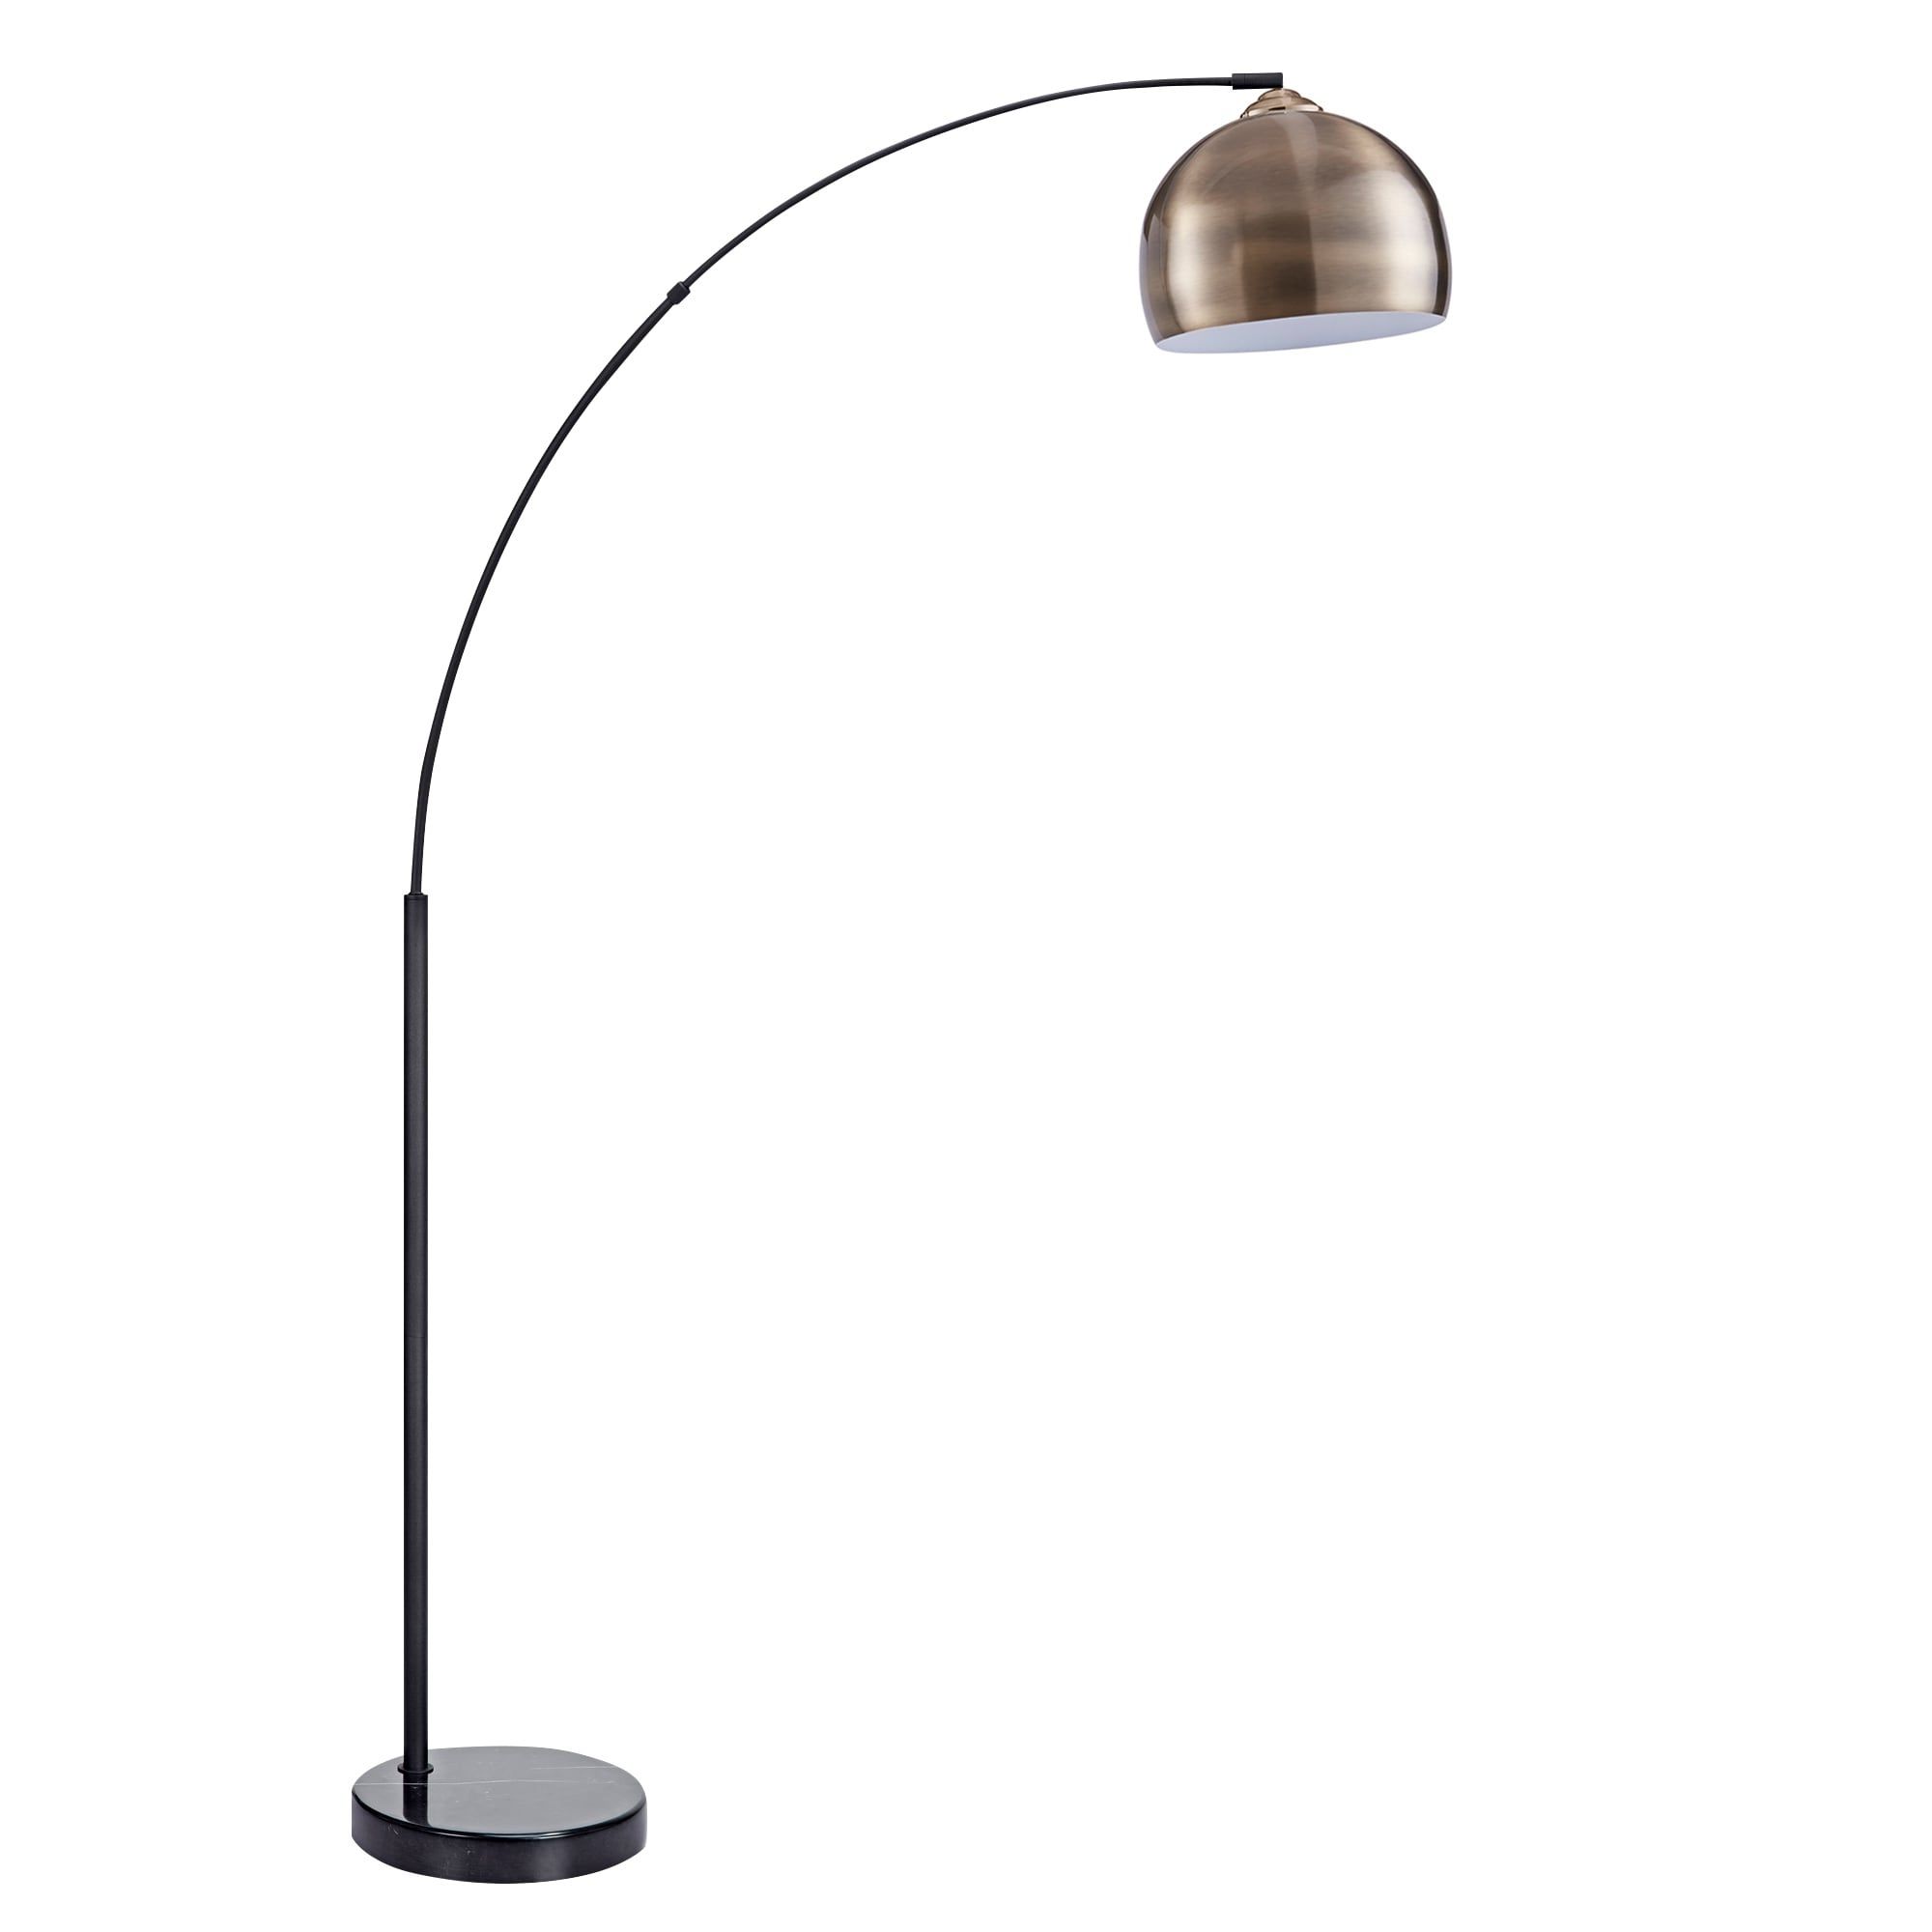 Teamson Home Arquer Arc Floor Lamp With Marble Base, Antique Brass Finished  Shade – On Sale – Overstock – 28386580 Inside Marble Base Floor Lamps (View 13 of 20)